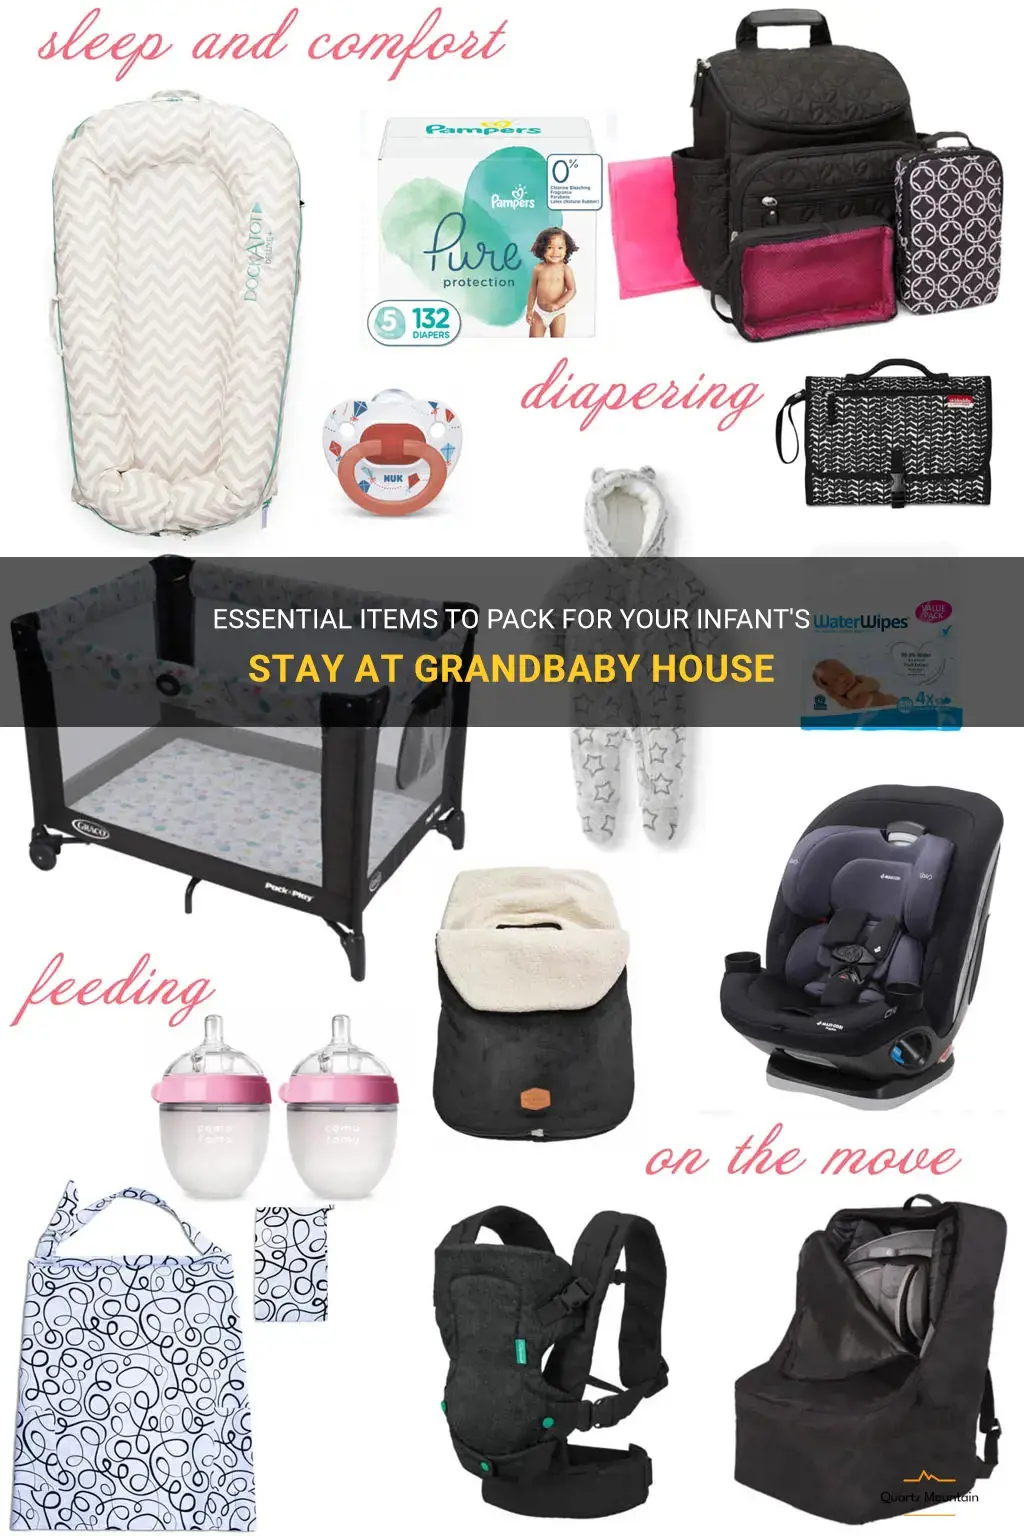 what to pack for infant at grandbaby house